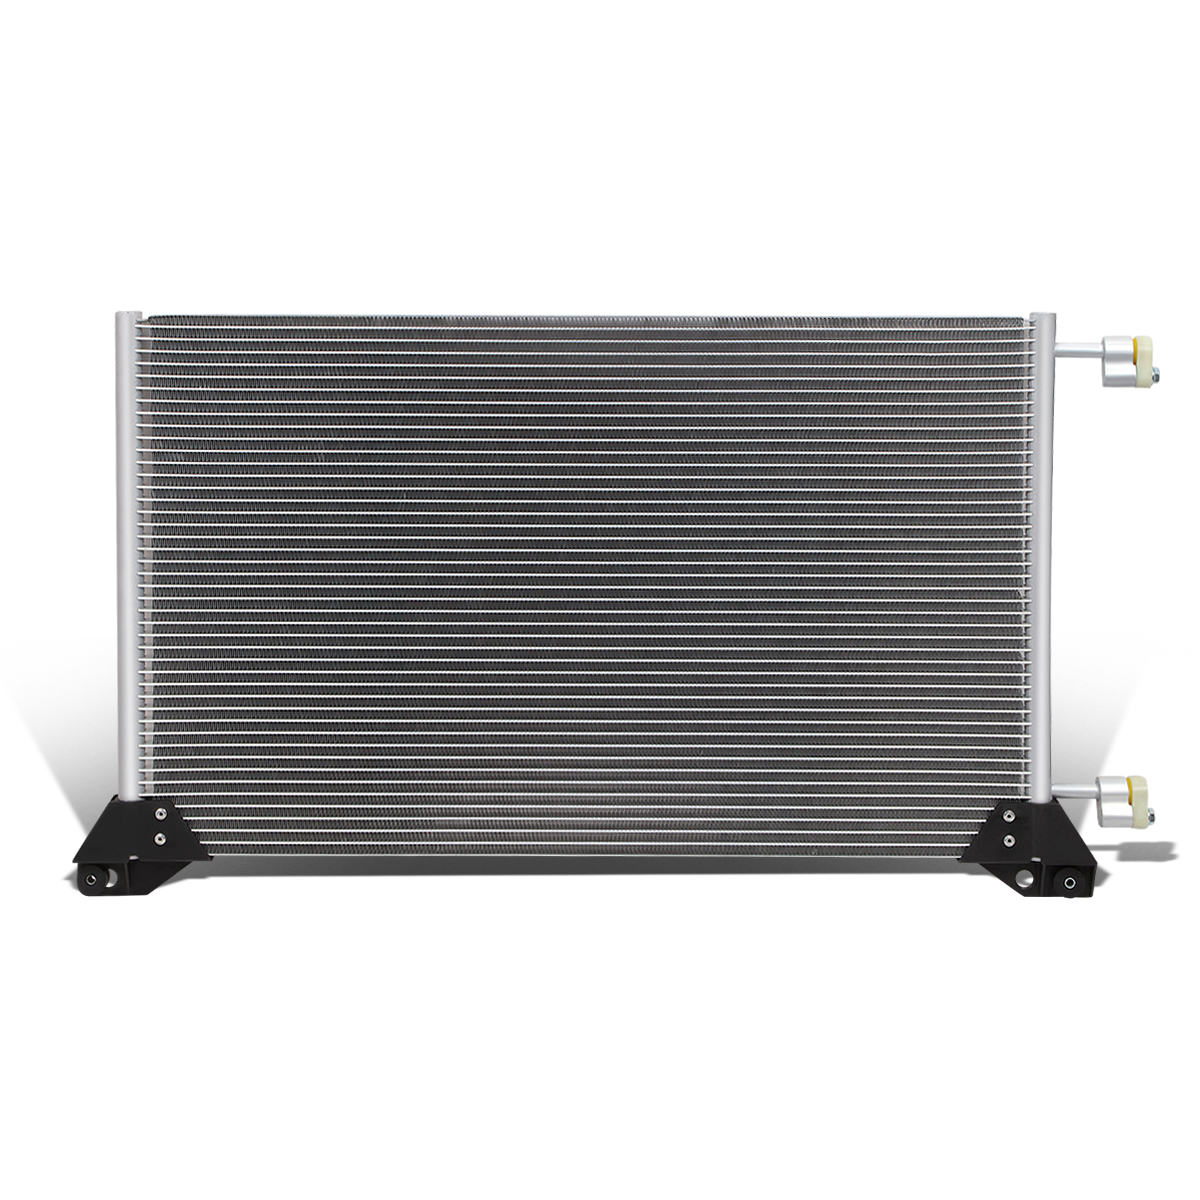 DNA Motoring OEM-CDS-4953 For 2000 to 2013 Chevy Suburban 1500 2500 GMC Sierra Yukon XL Cadillac Escalade 4.3L - 8.1L 4953 Aluminum Air Conditioning A/C Condenser 01 02 03 04 05 06 07 08 09 10 11 12 - image 1 of 6